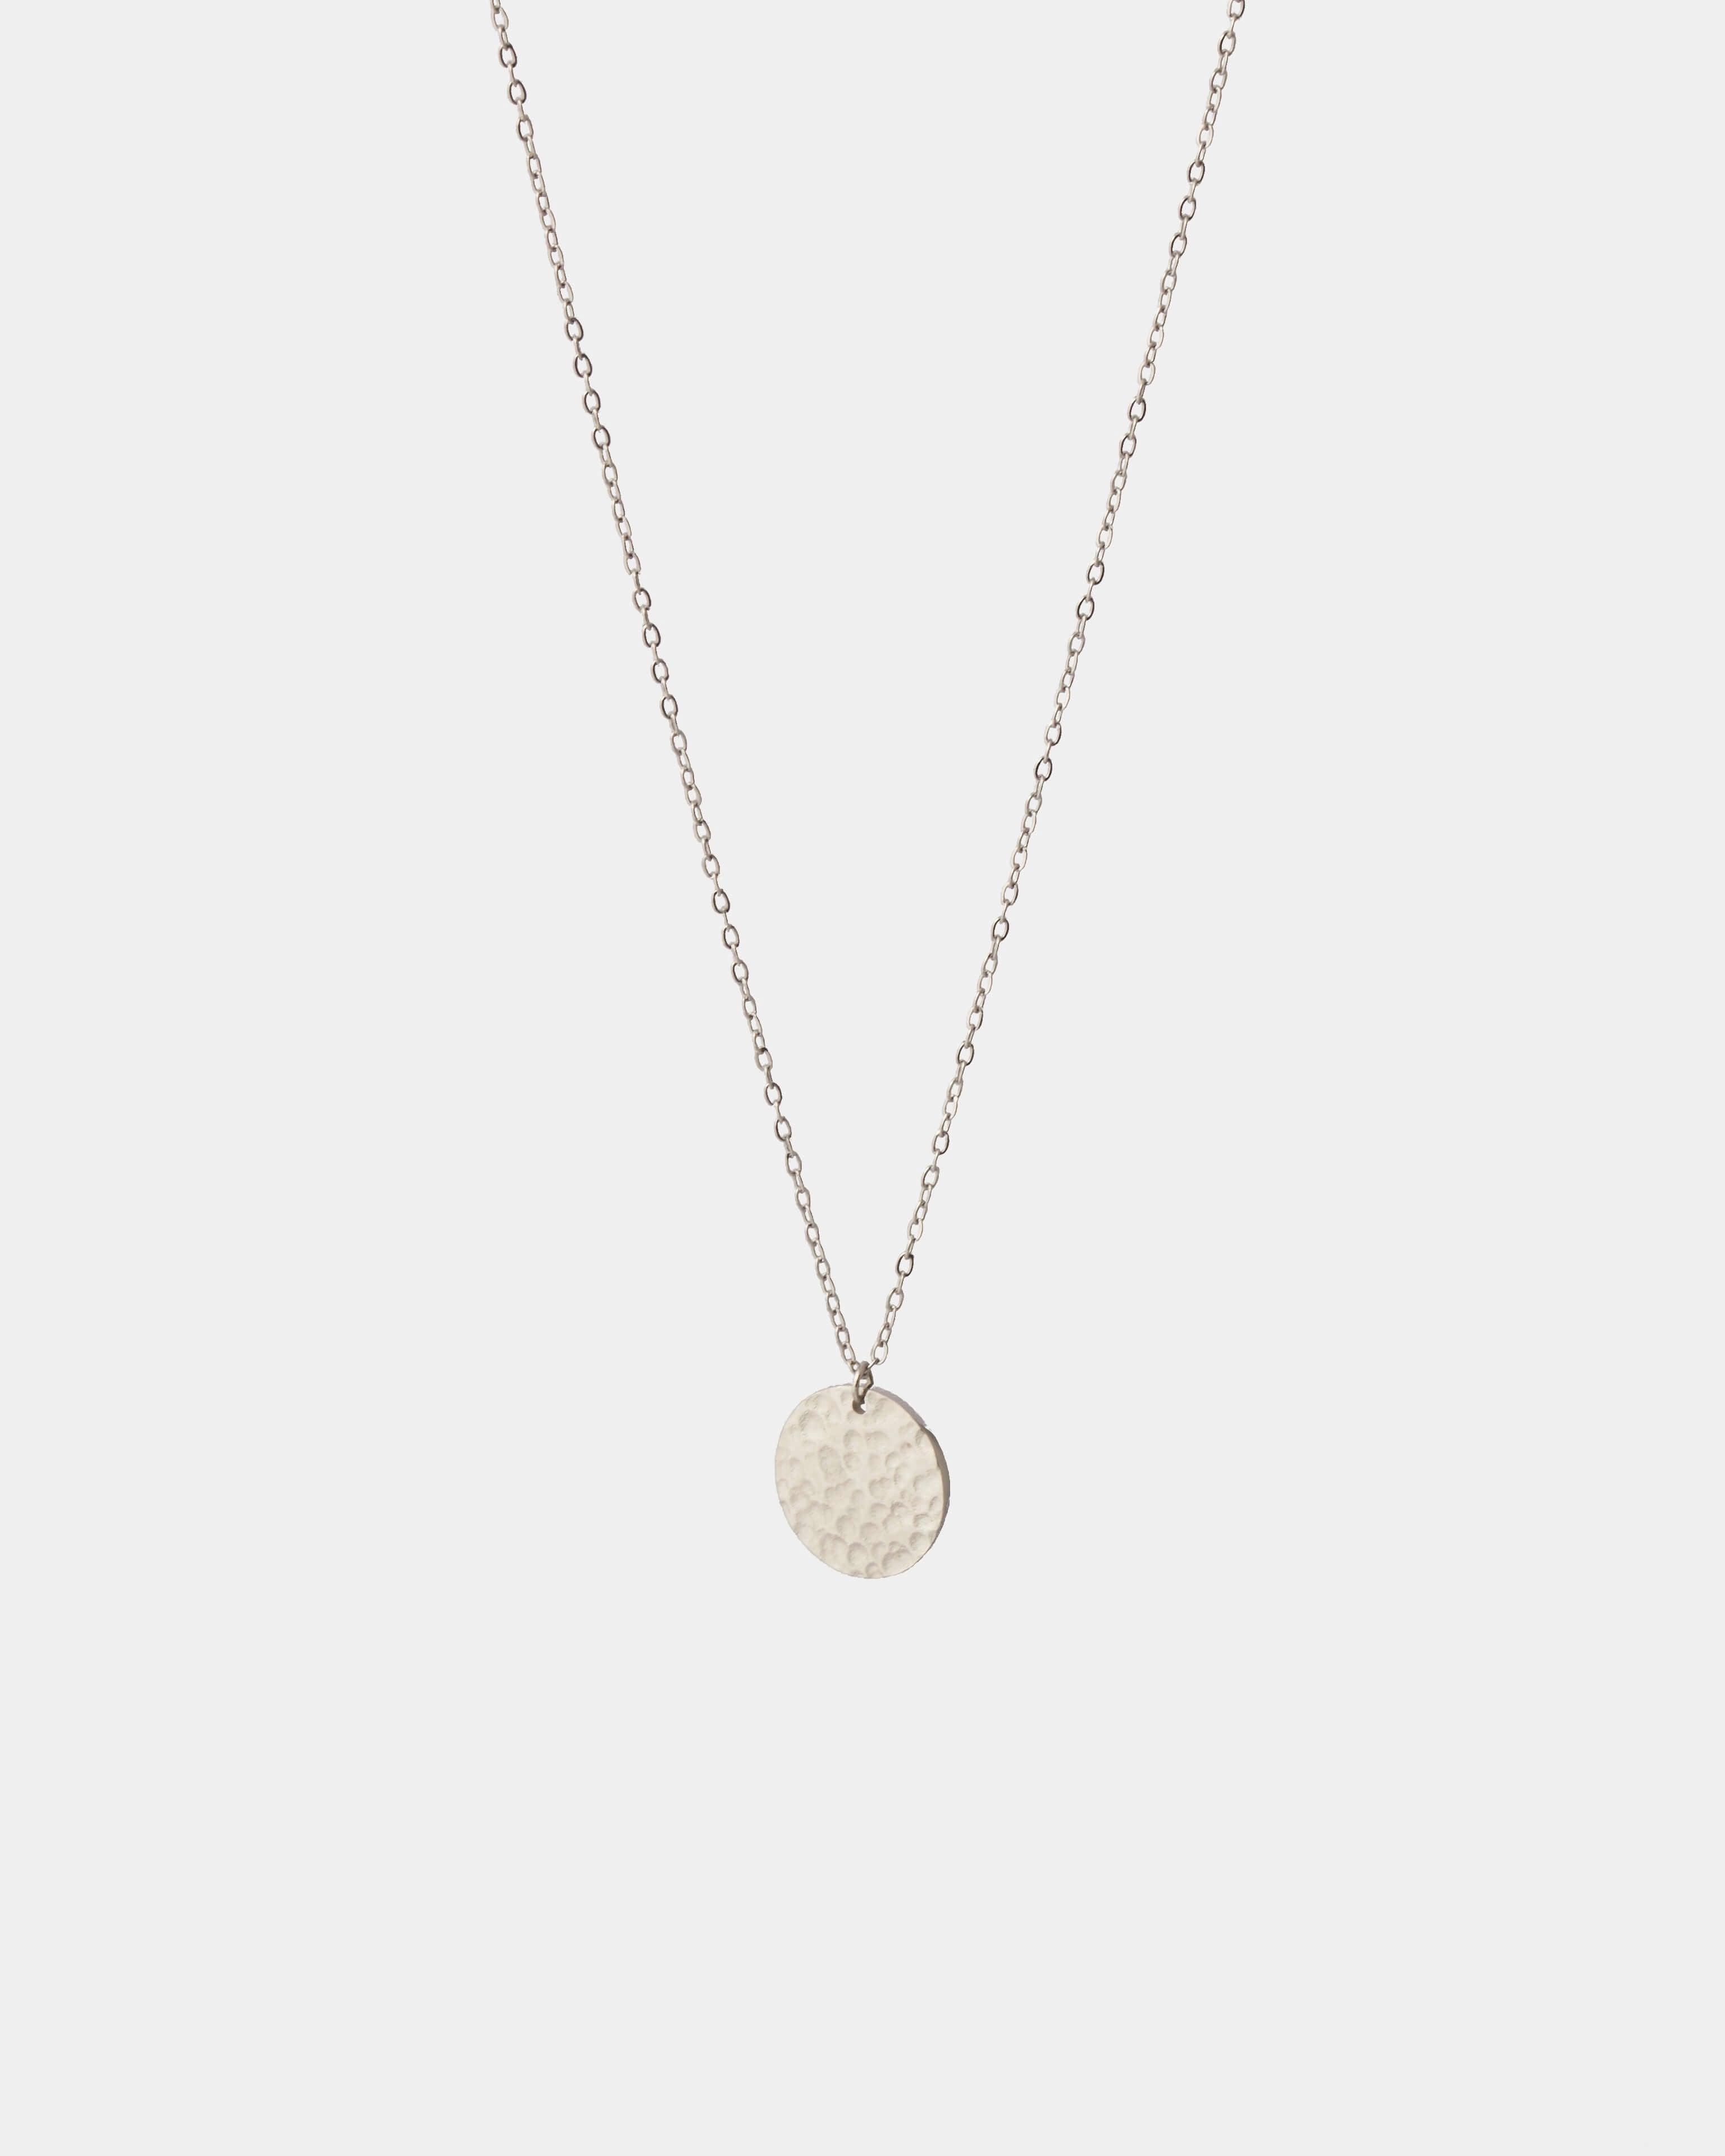 COSMIC DISK NECKLACE - LIMELY